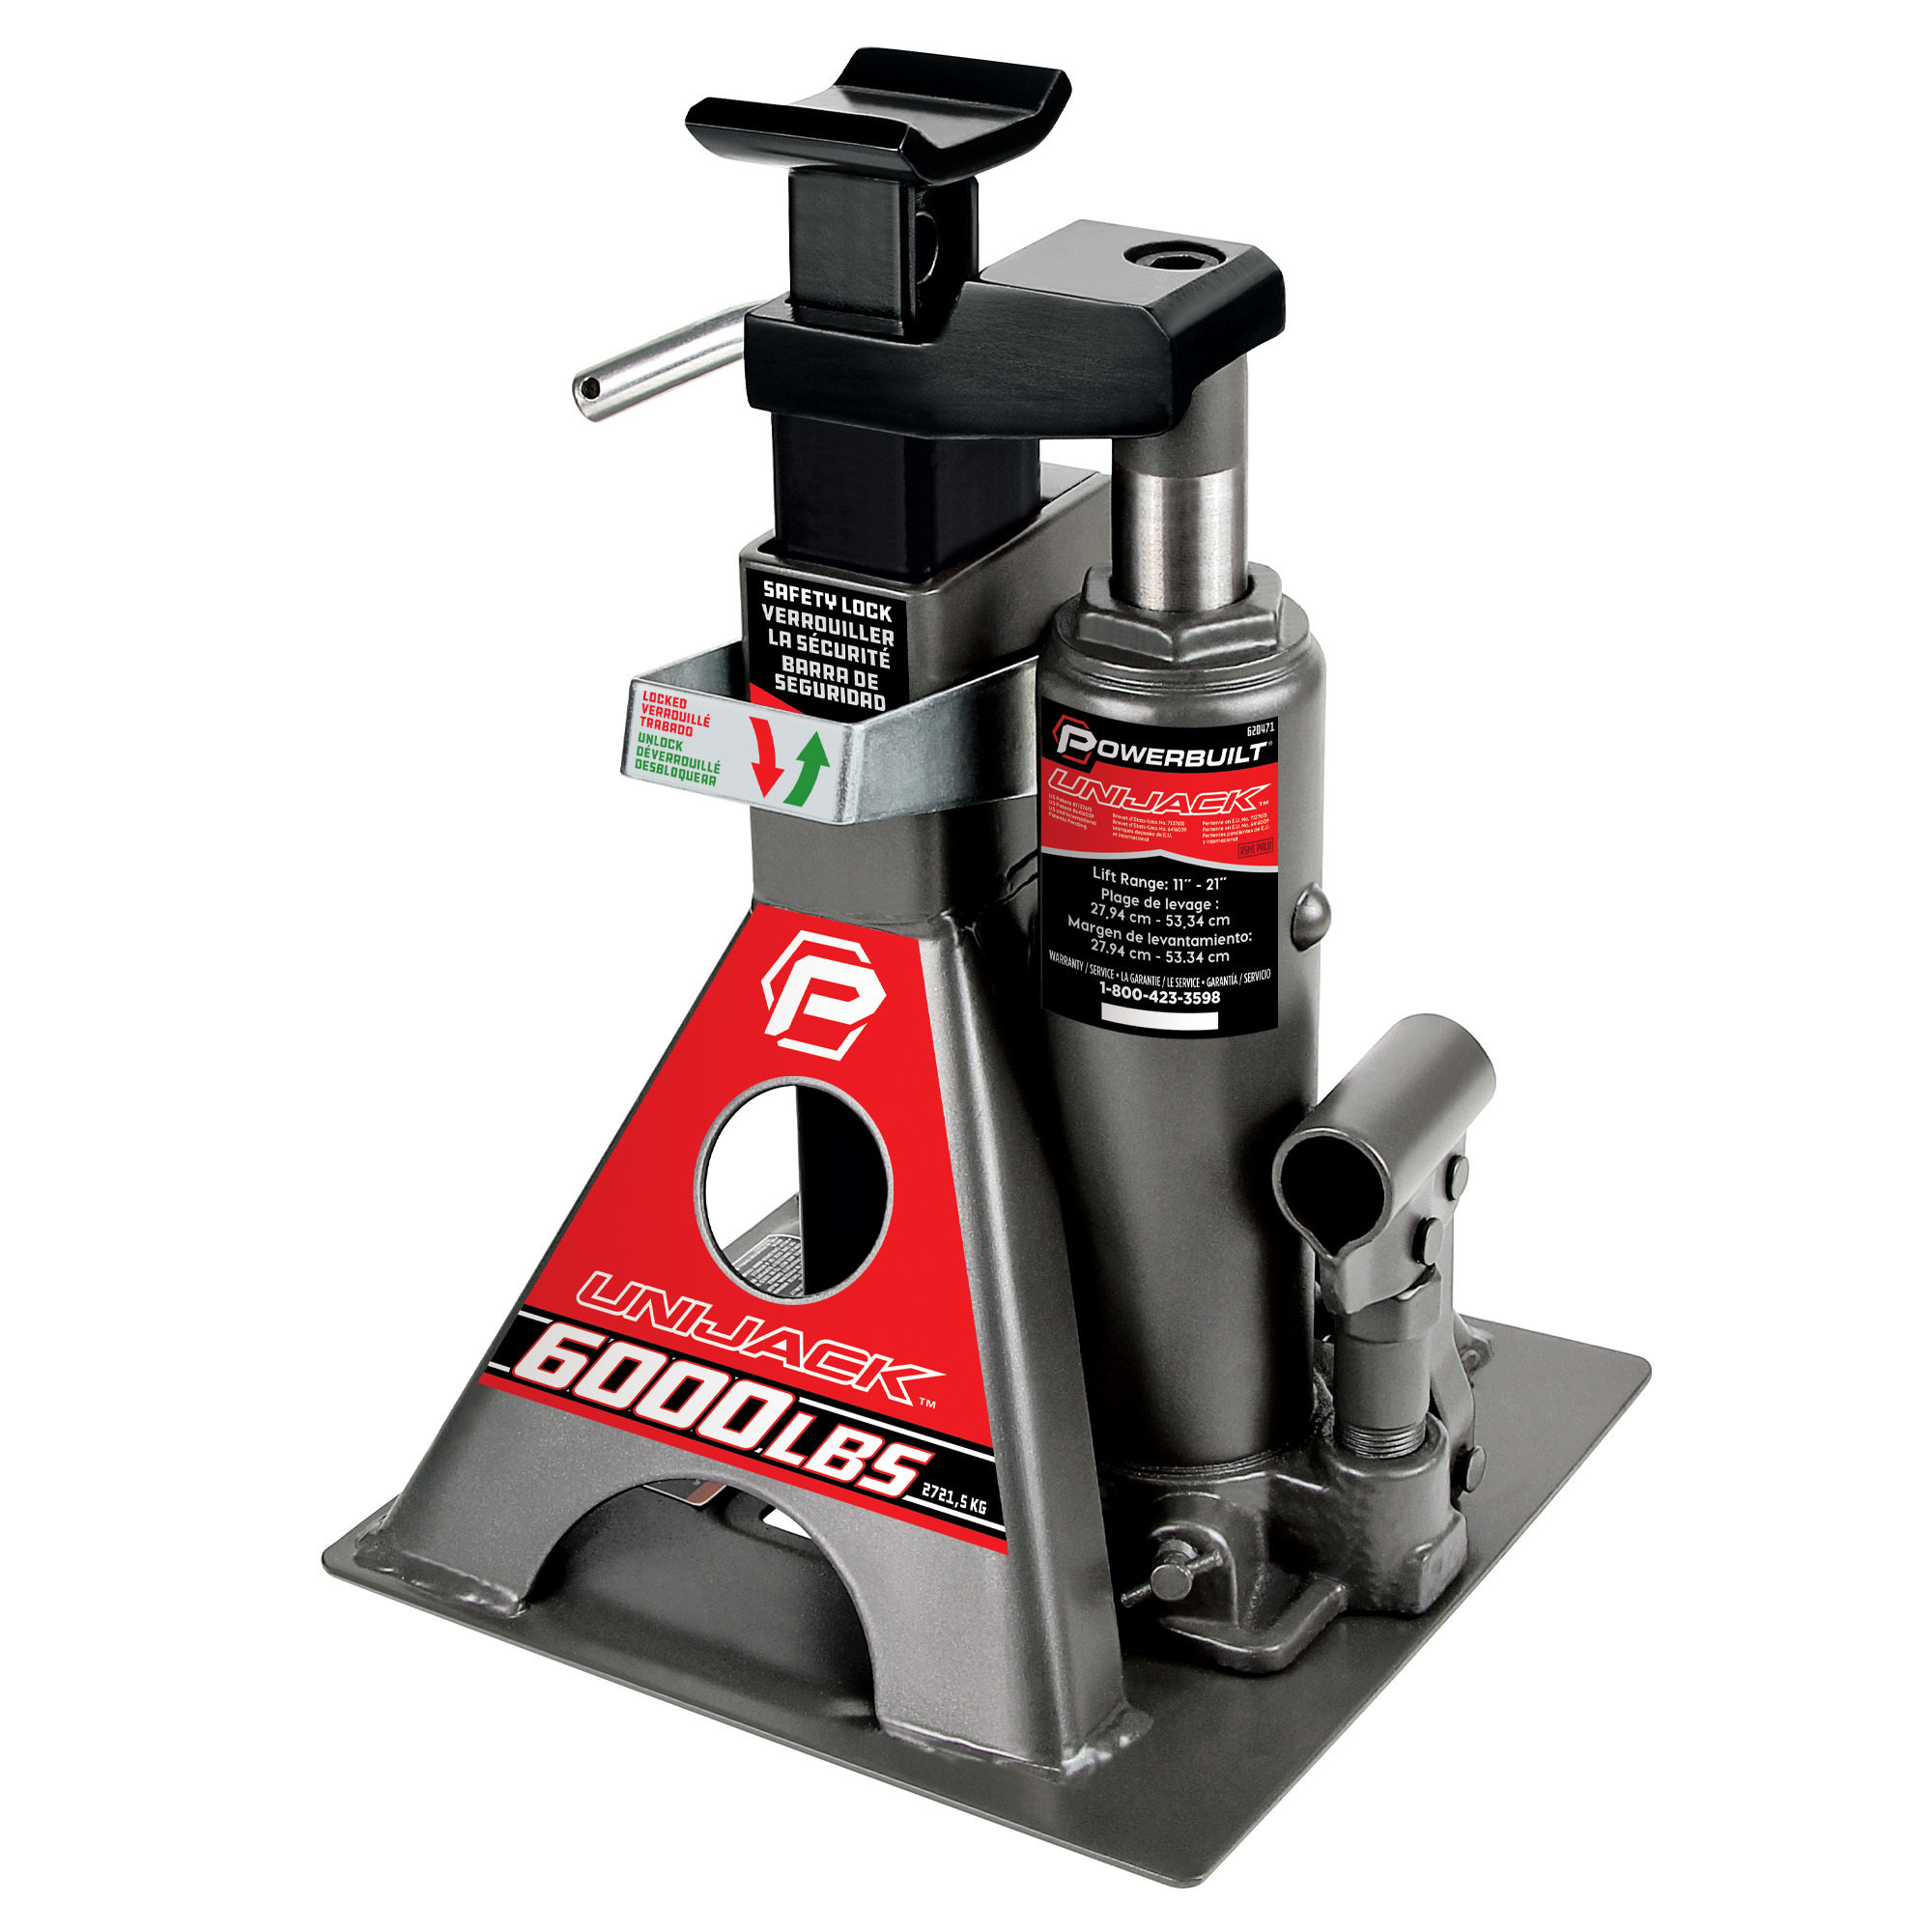 Powerbuilt, 3 Ton Unijack Bottle Jack and Jackstand in One, Lift Capacity 3 Tons, Max. Lift Height 21 in, Model 620471